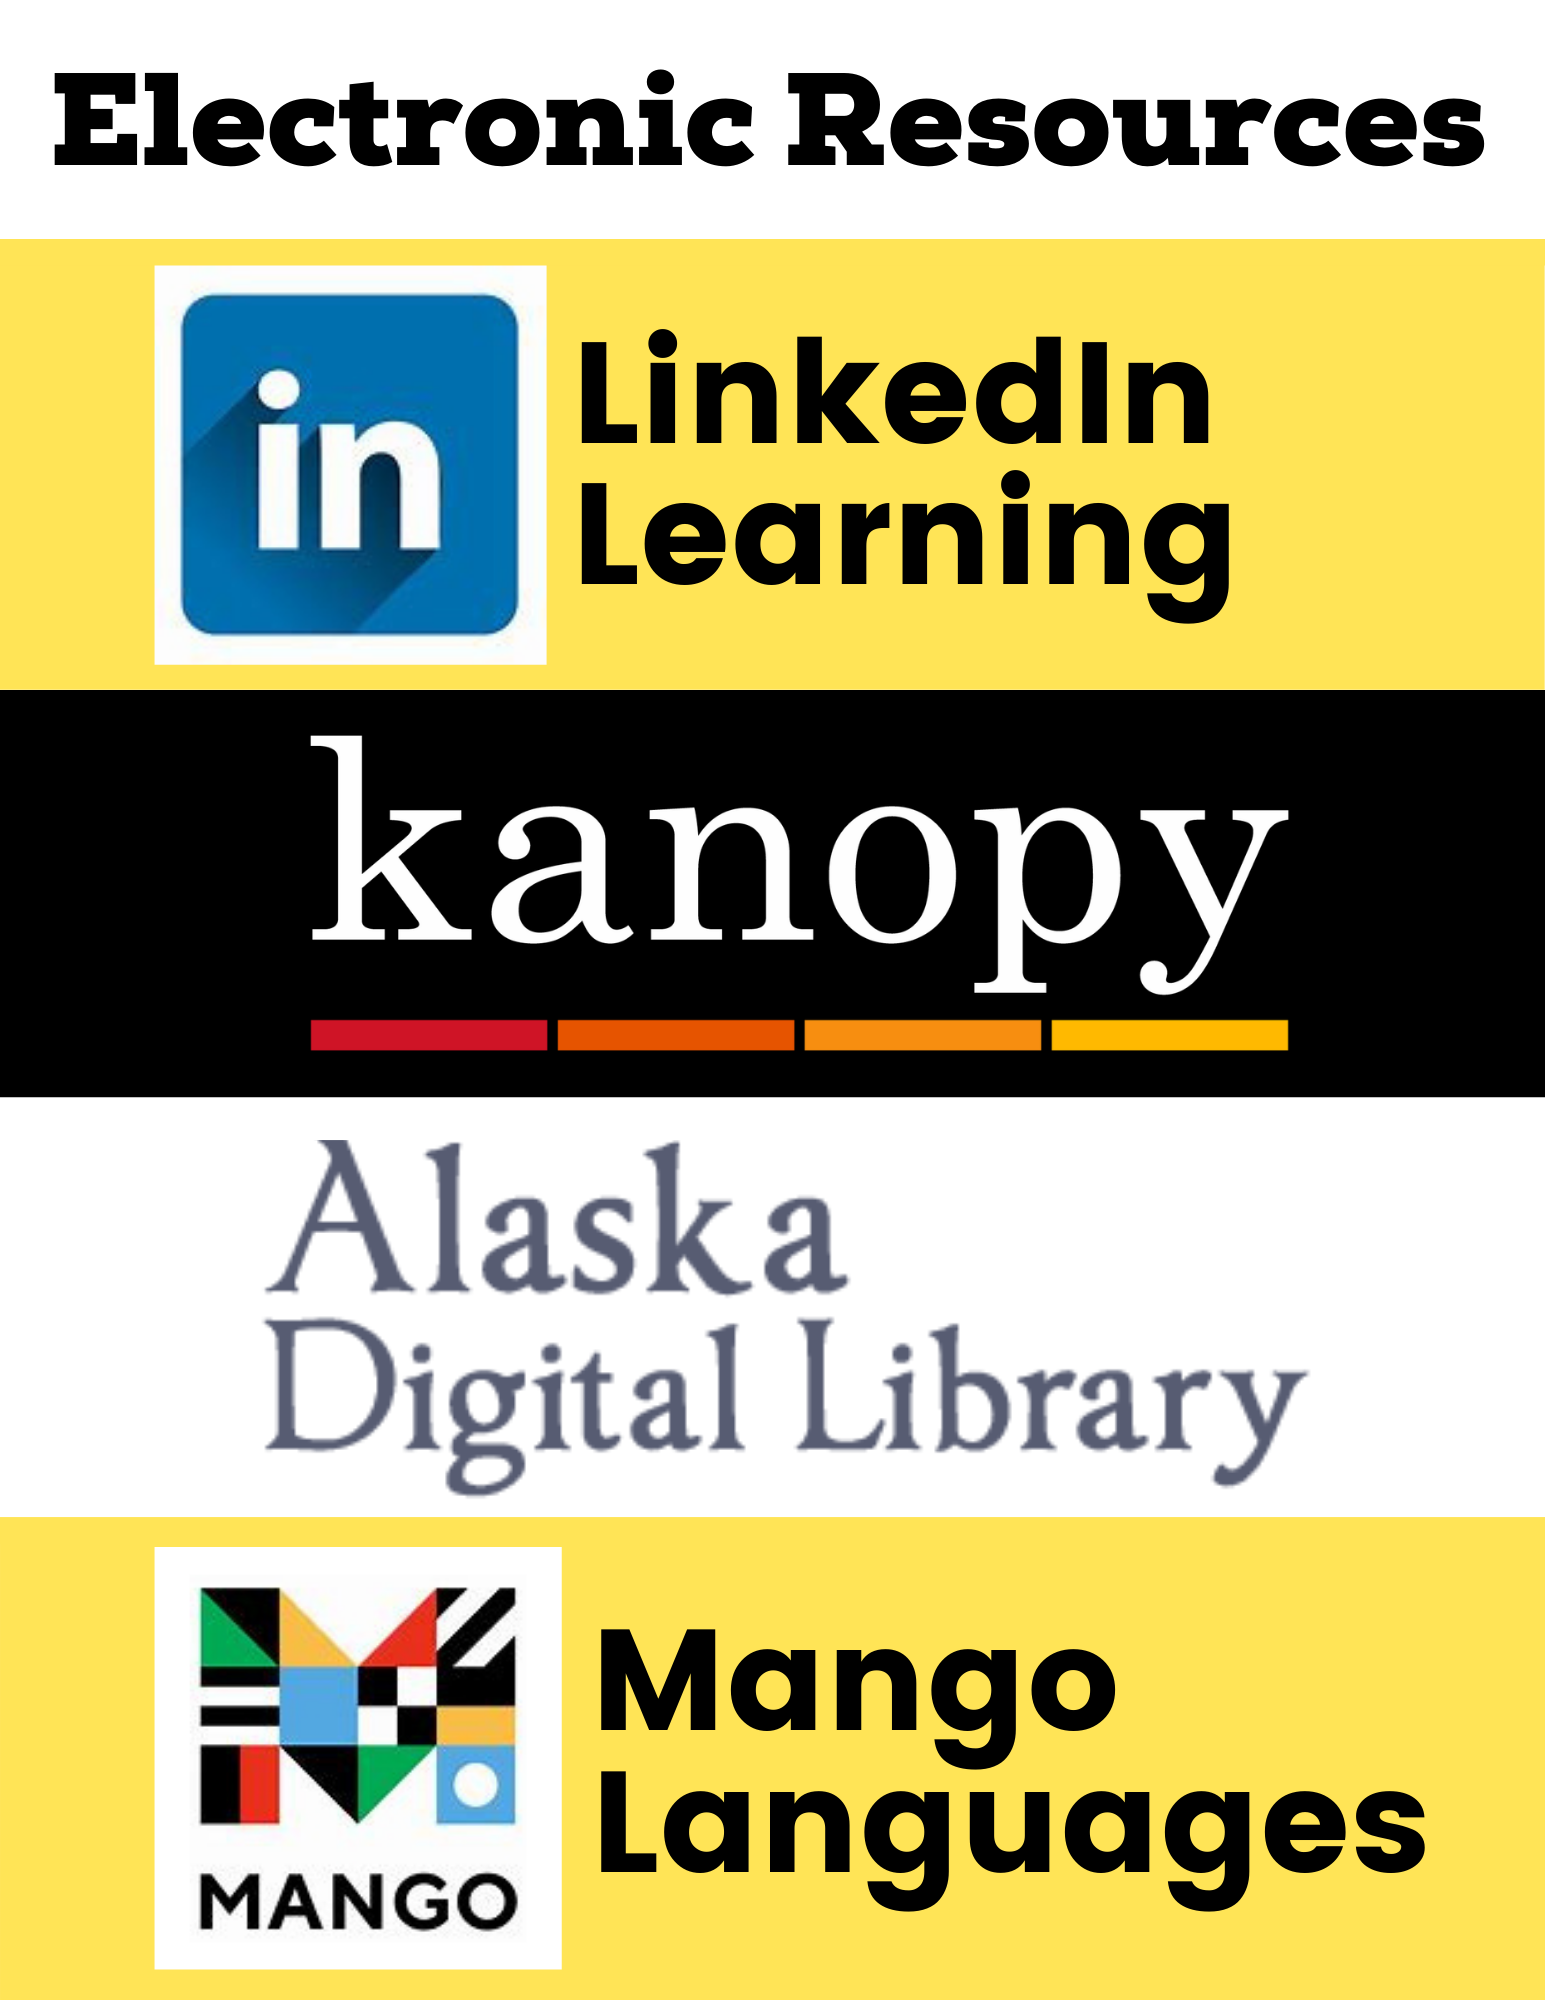 Skagway Public Library Electronic Resources